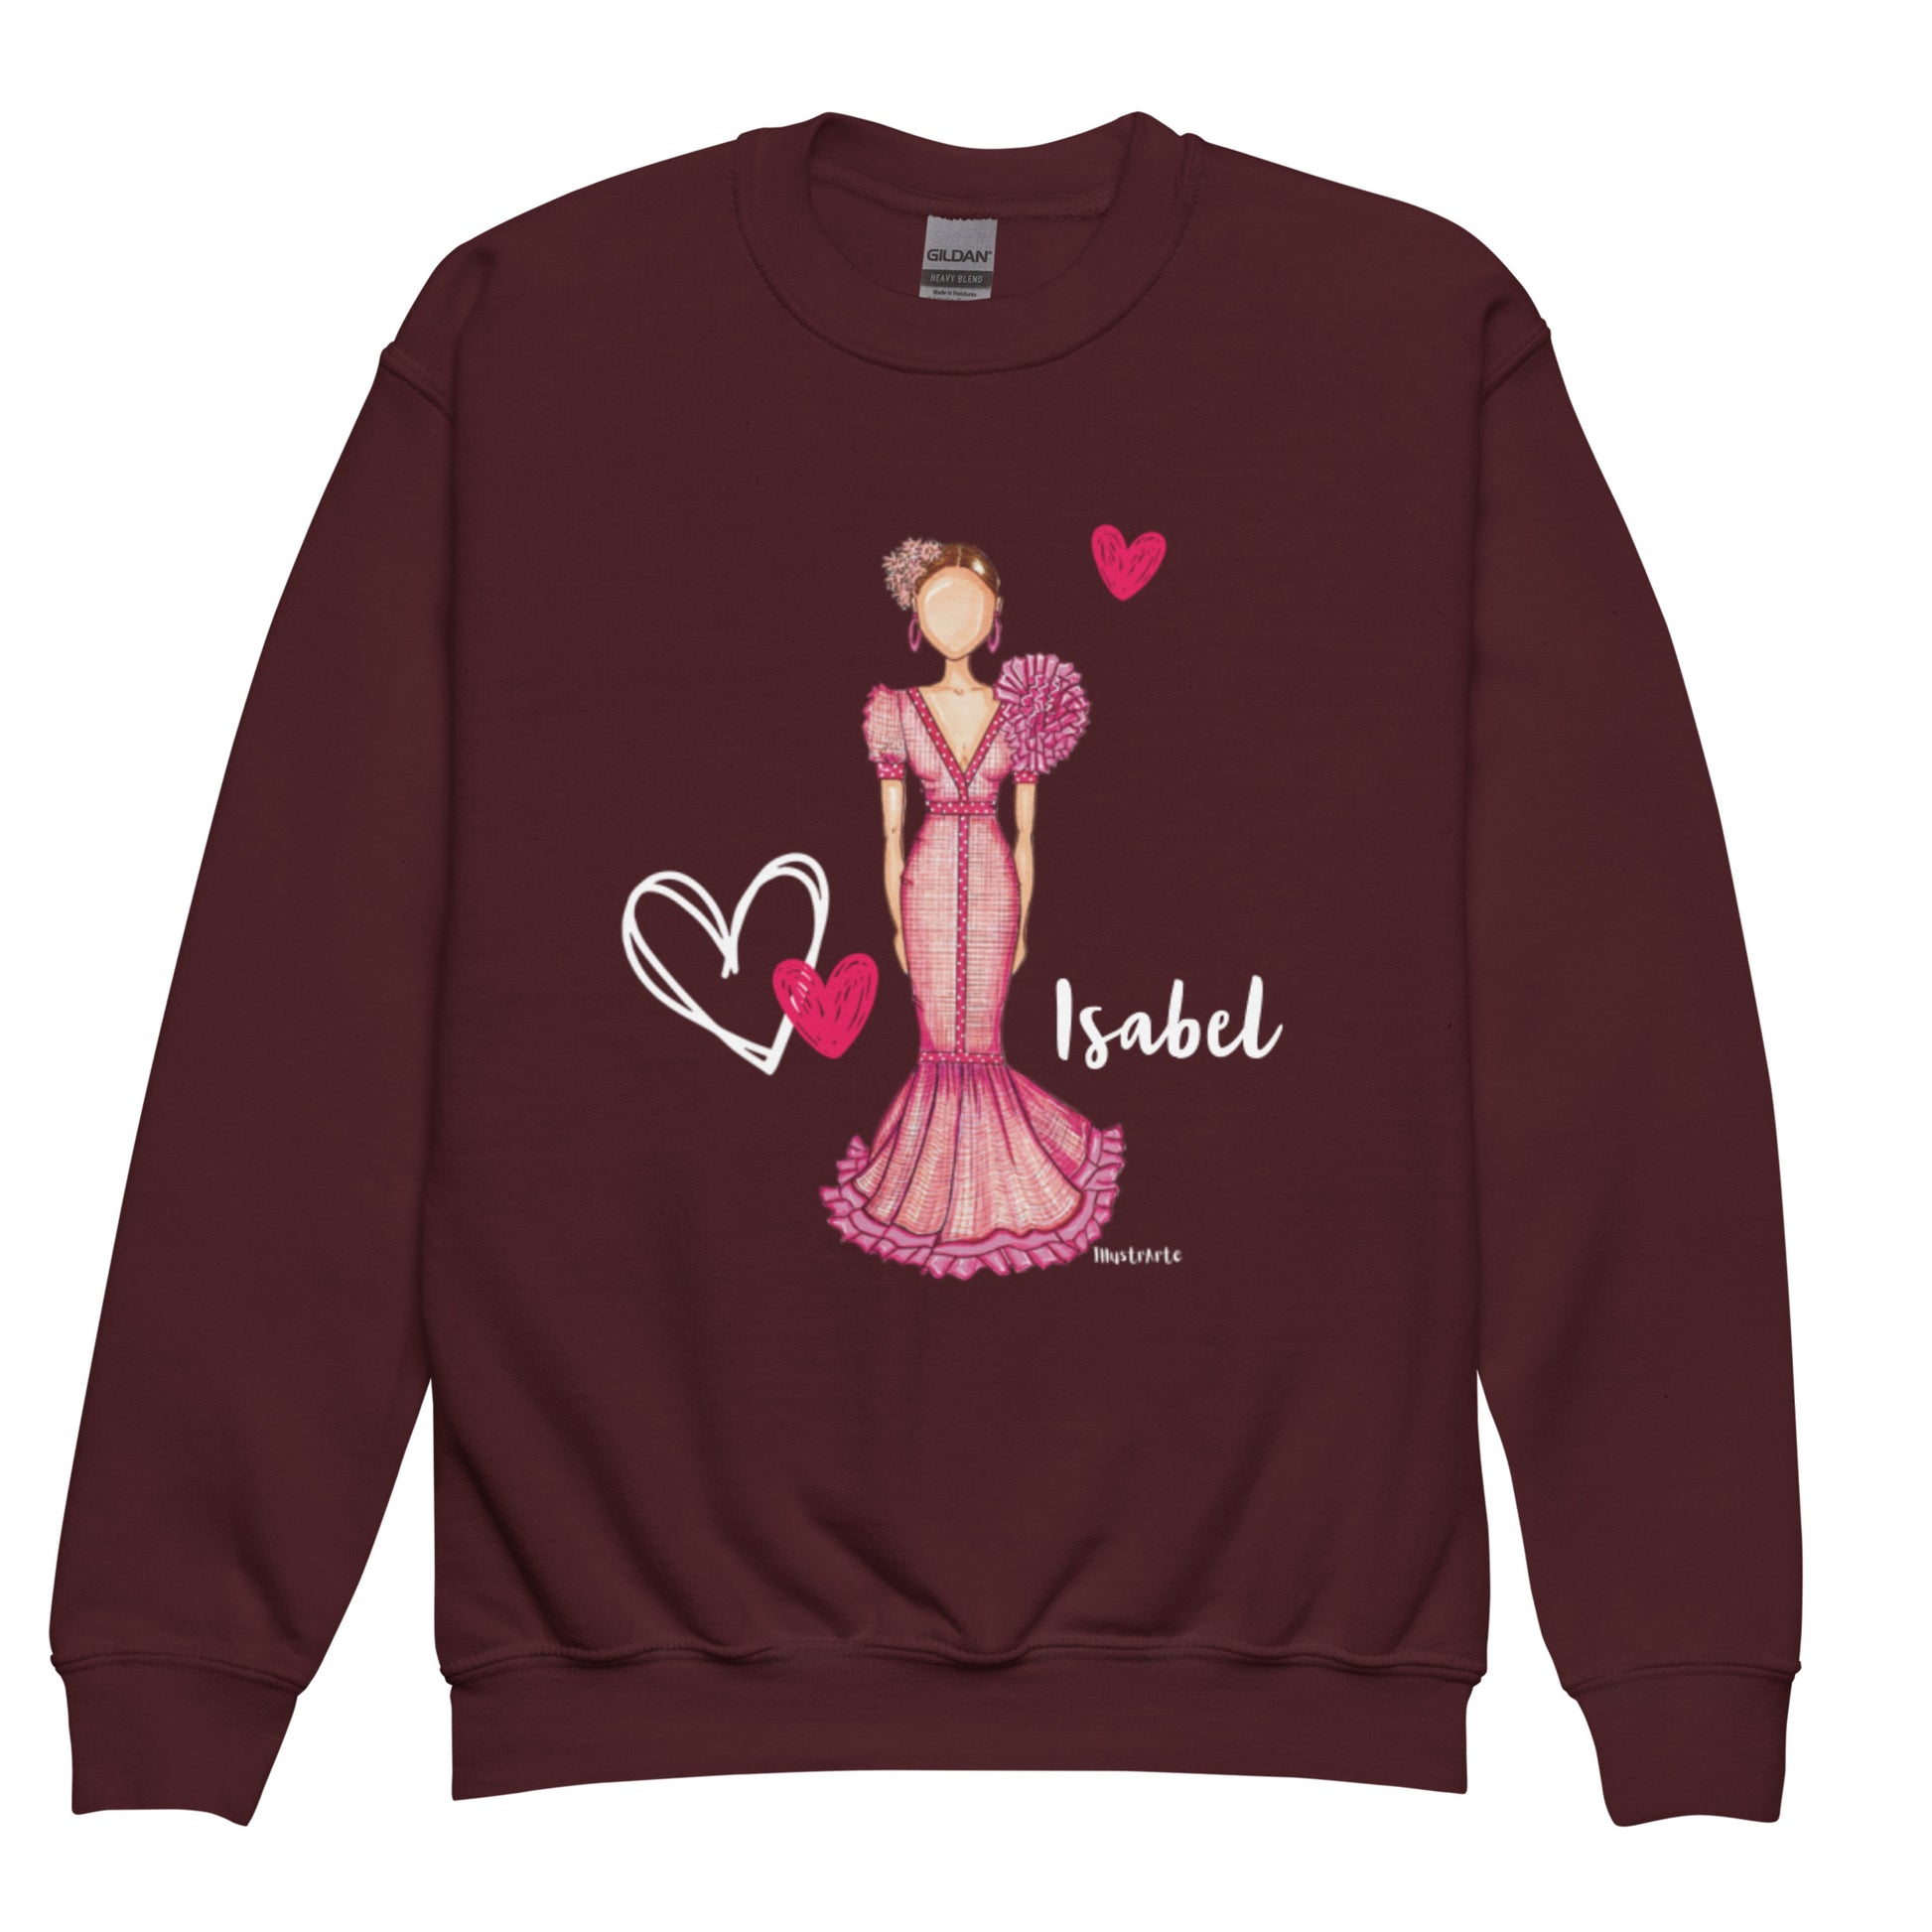 a sweater with a woman in a pink dress and hearts